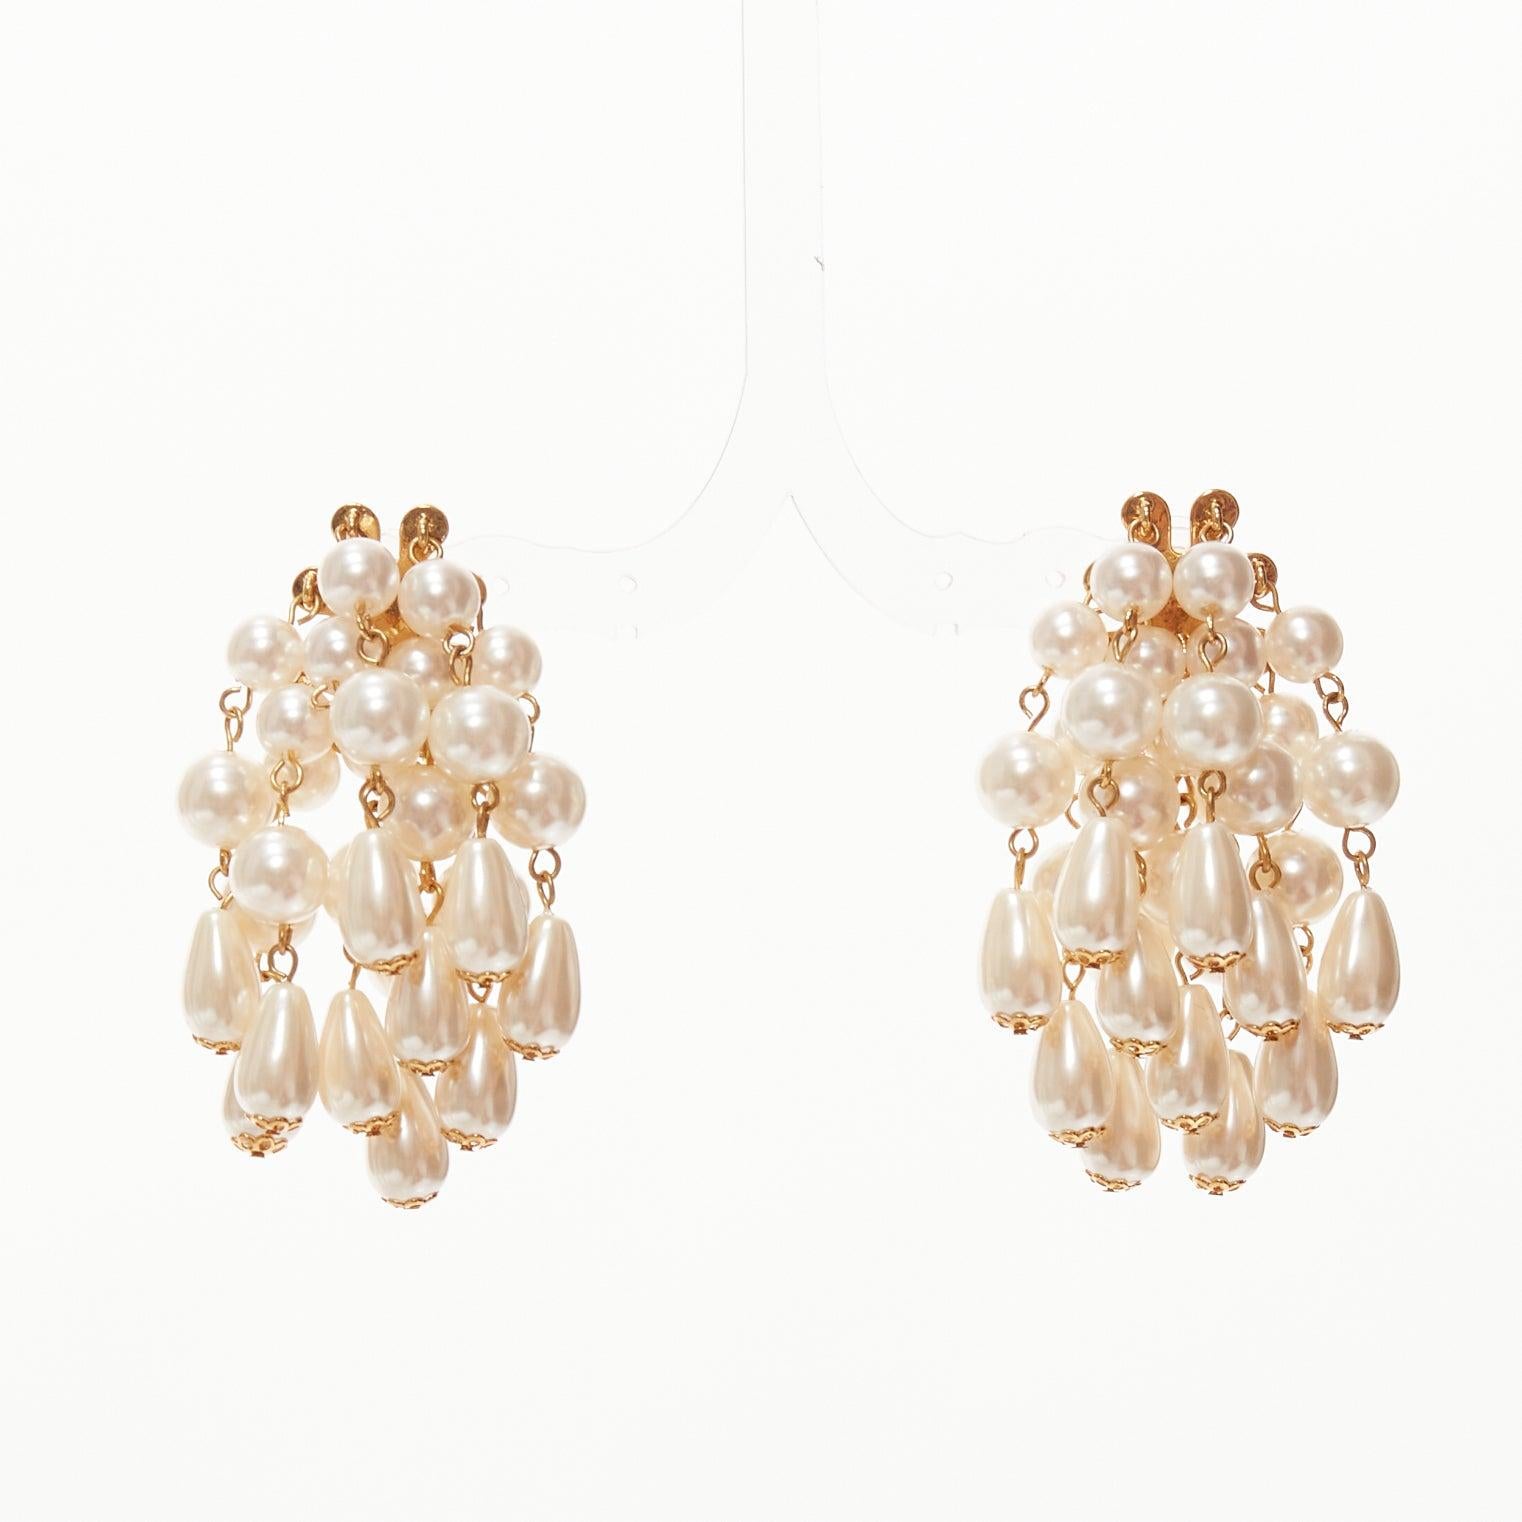 LELE SADOUGHI cream faux pearl starburst dangling chandelier pin earrings
Reference: AAWC/A01232
Brand: Lele Sadoughi
Material: Faux Pearl, Metal
Color: Pearl, Gold
Closure: Pin
Lining: Gold Metal

CONDITION:
Condition: Excellent, this item was